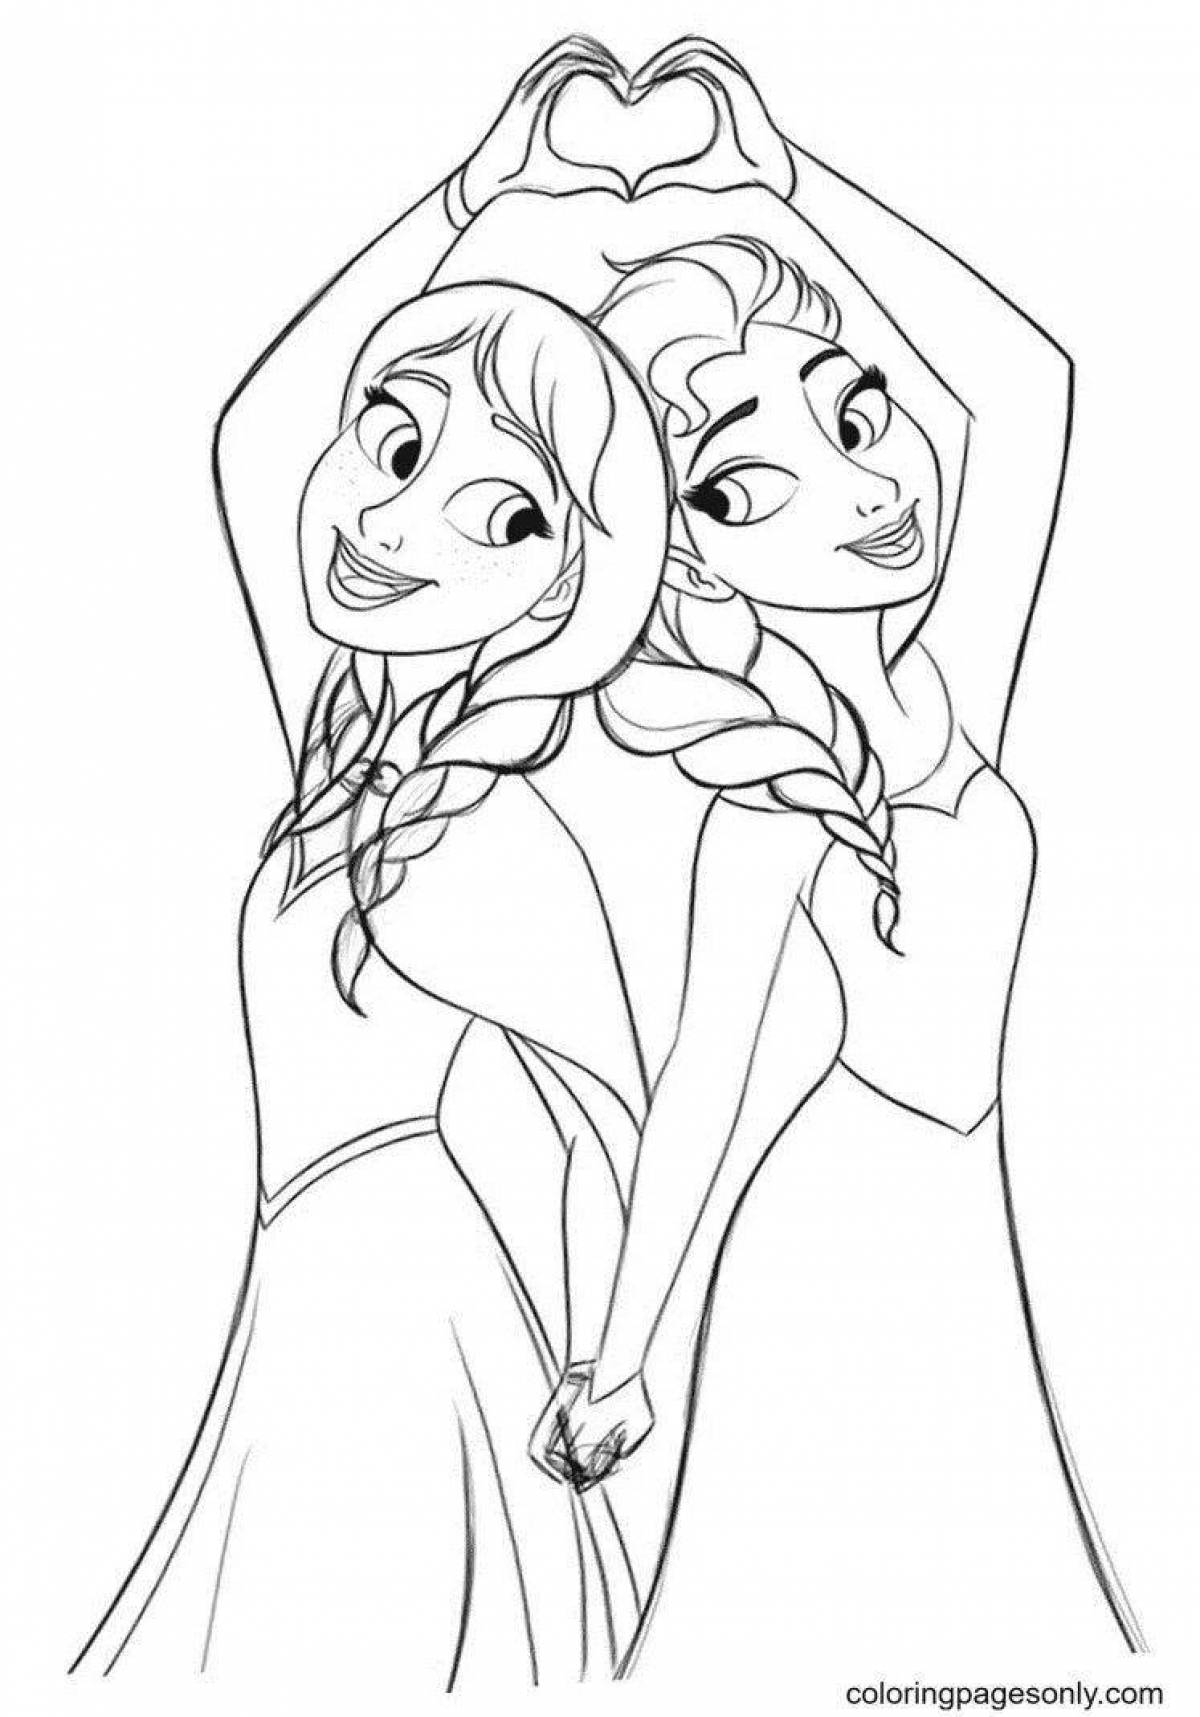 Playful cartoon sisters coloring page